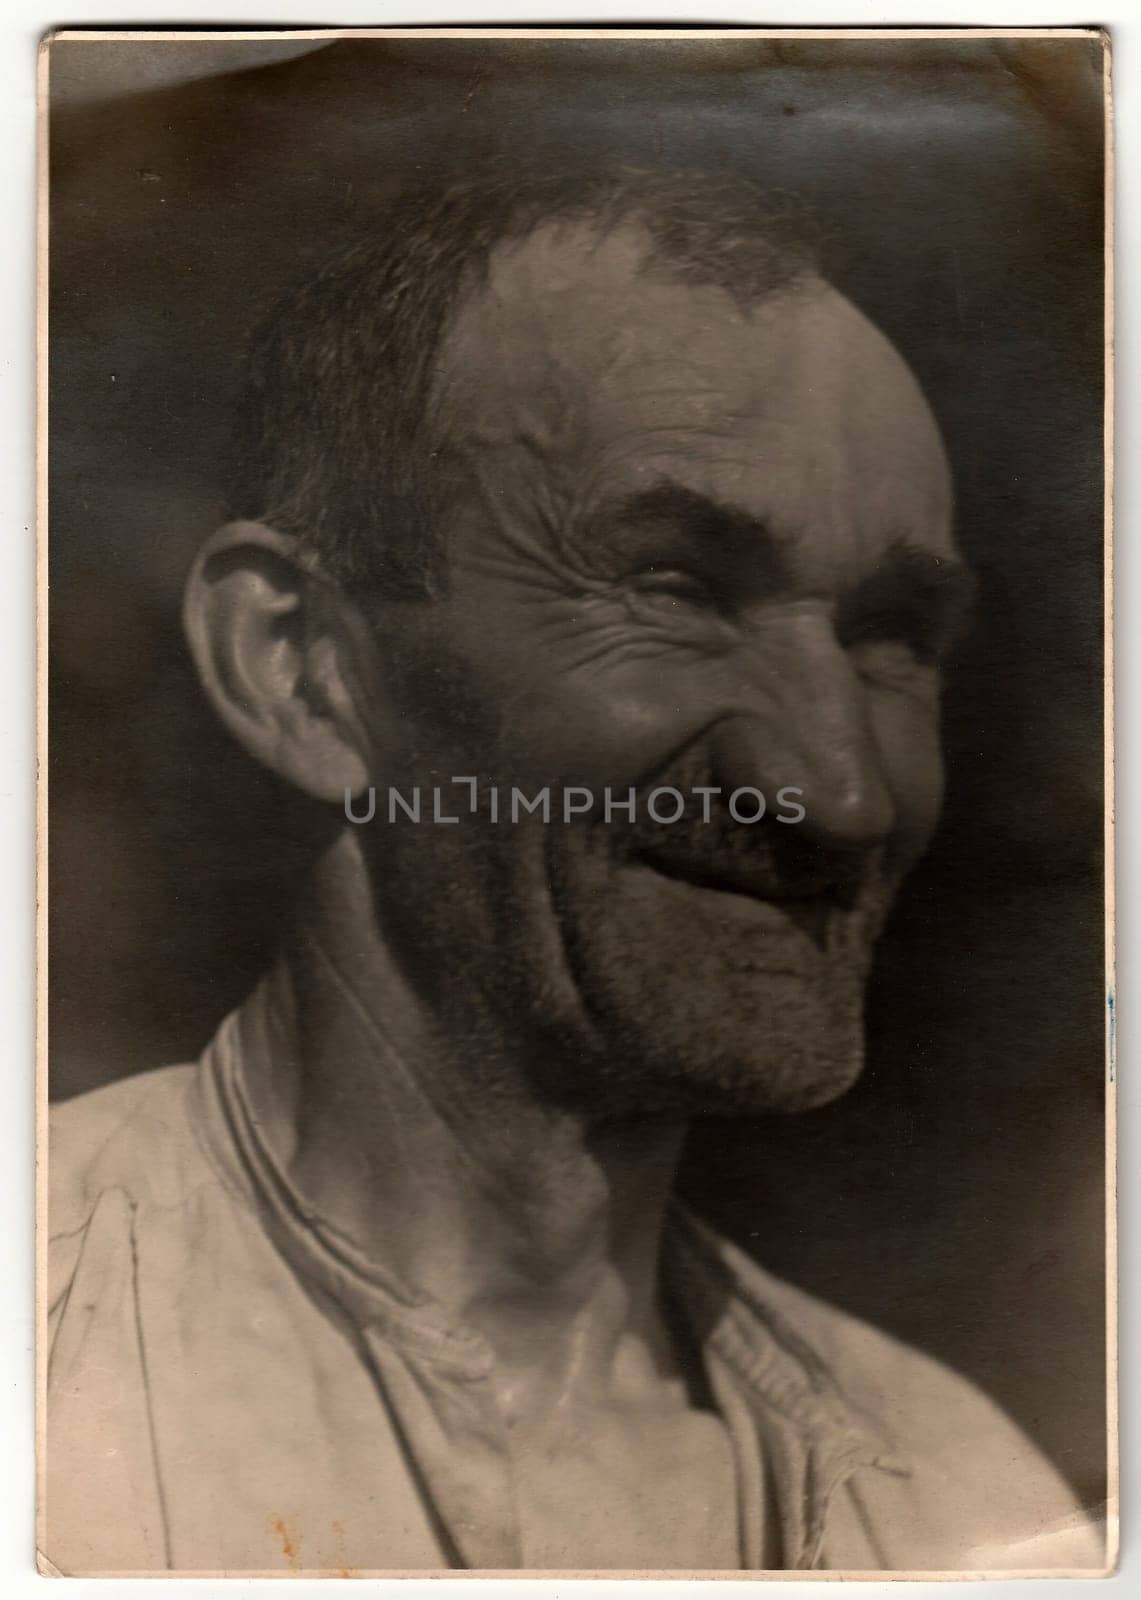 A vintage photo shows old man with unshaven face. by roman_nerud